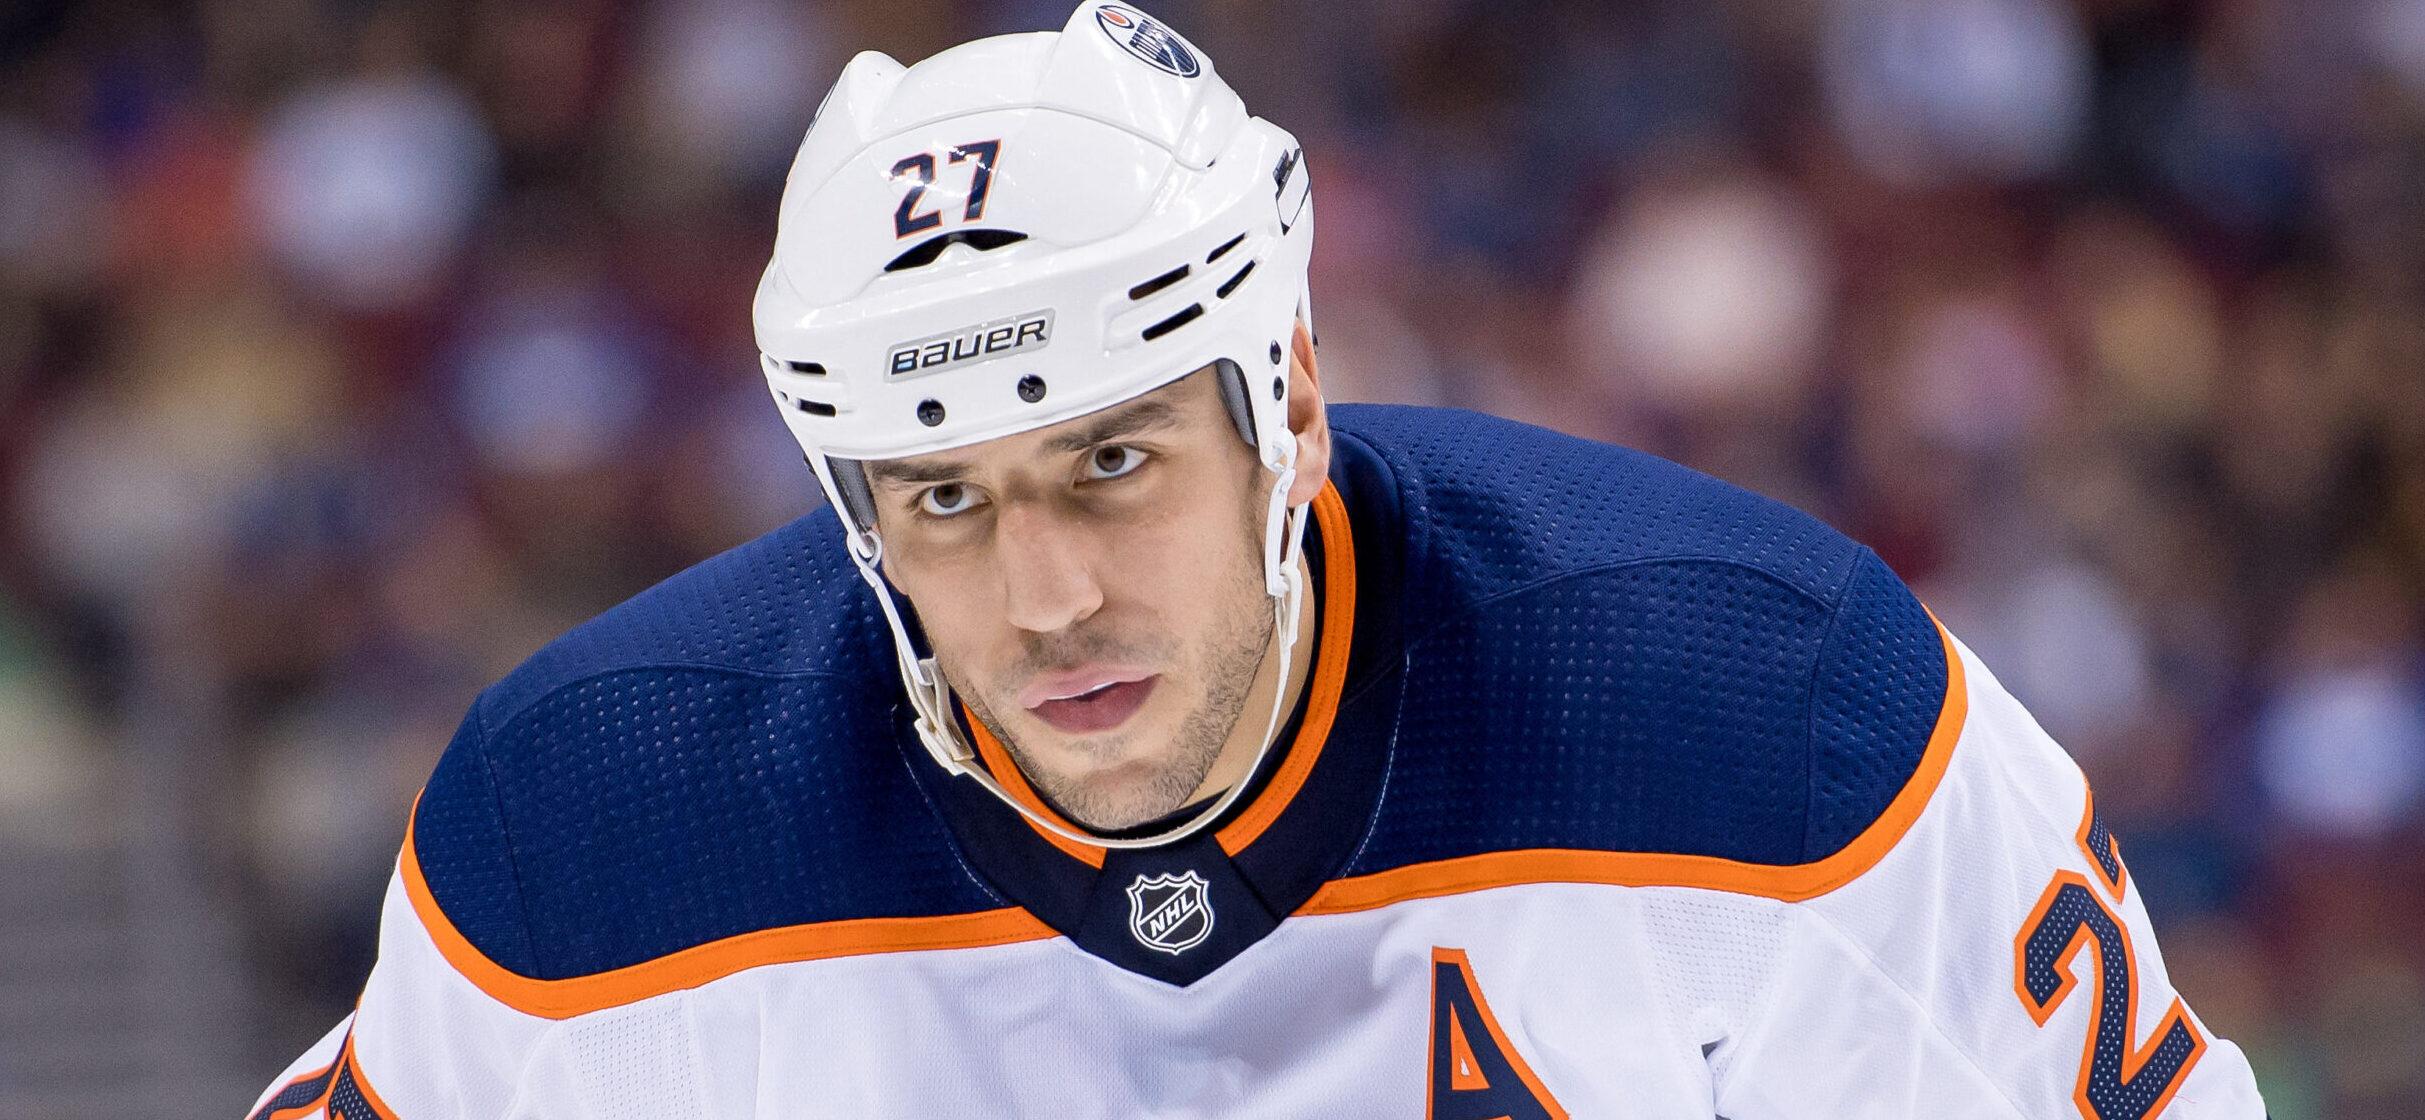 NHL Bruins’ Milan Lucic’s Wife Files For Legal Separation Following Domestic Violence Arrest